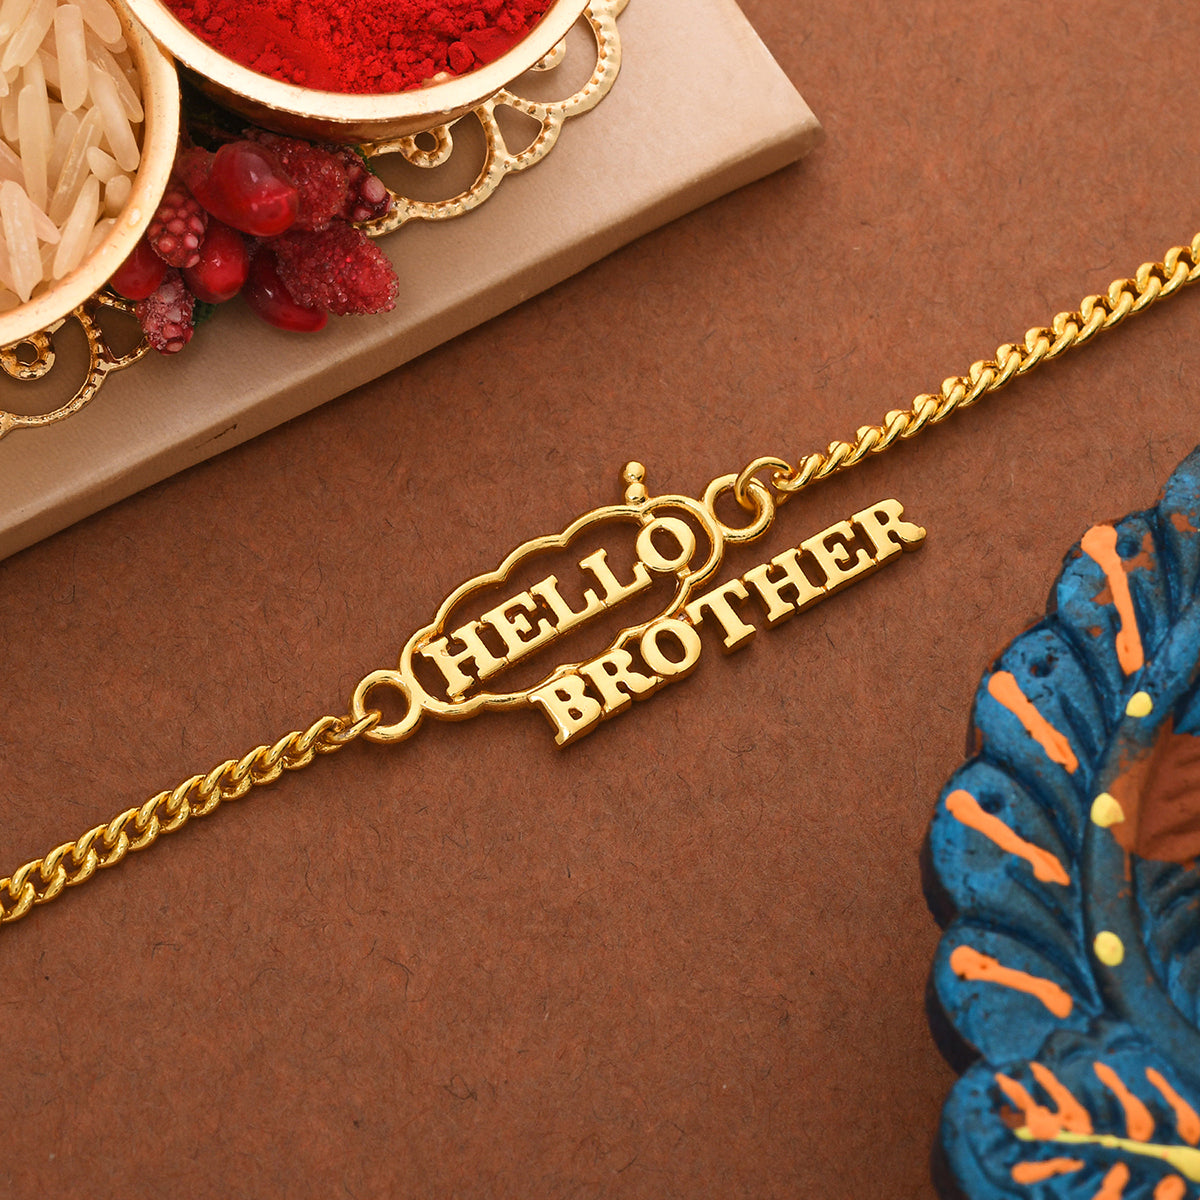 Rakhi Gift for Sister Under 2000: Best Rakhi Gift for Sister Under 2000 in  India to Fit Your Budget - The Economic Times